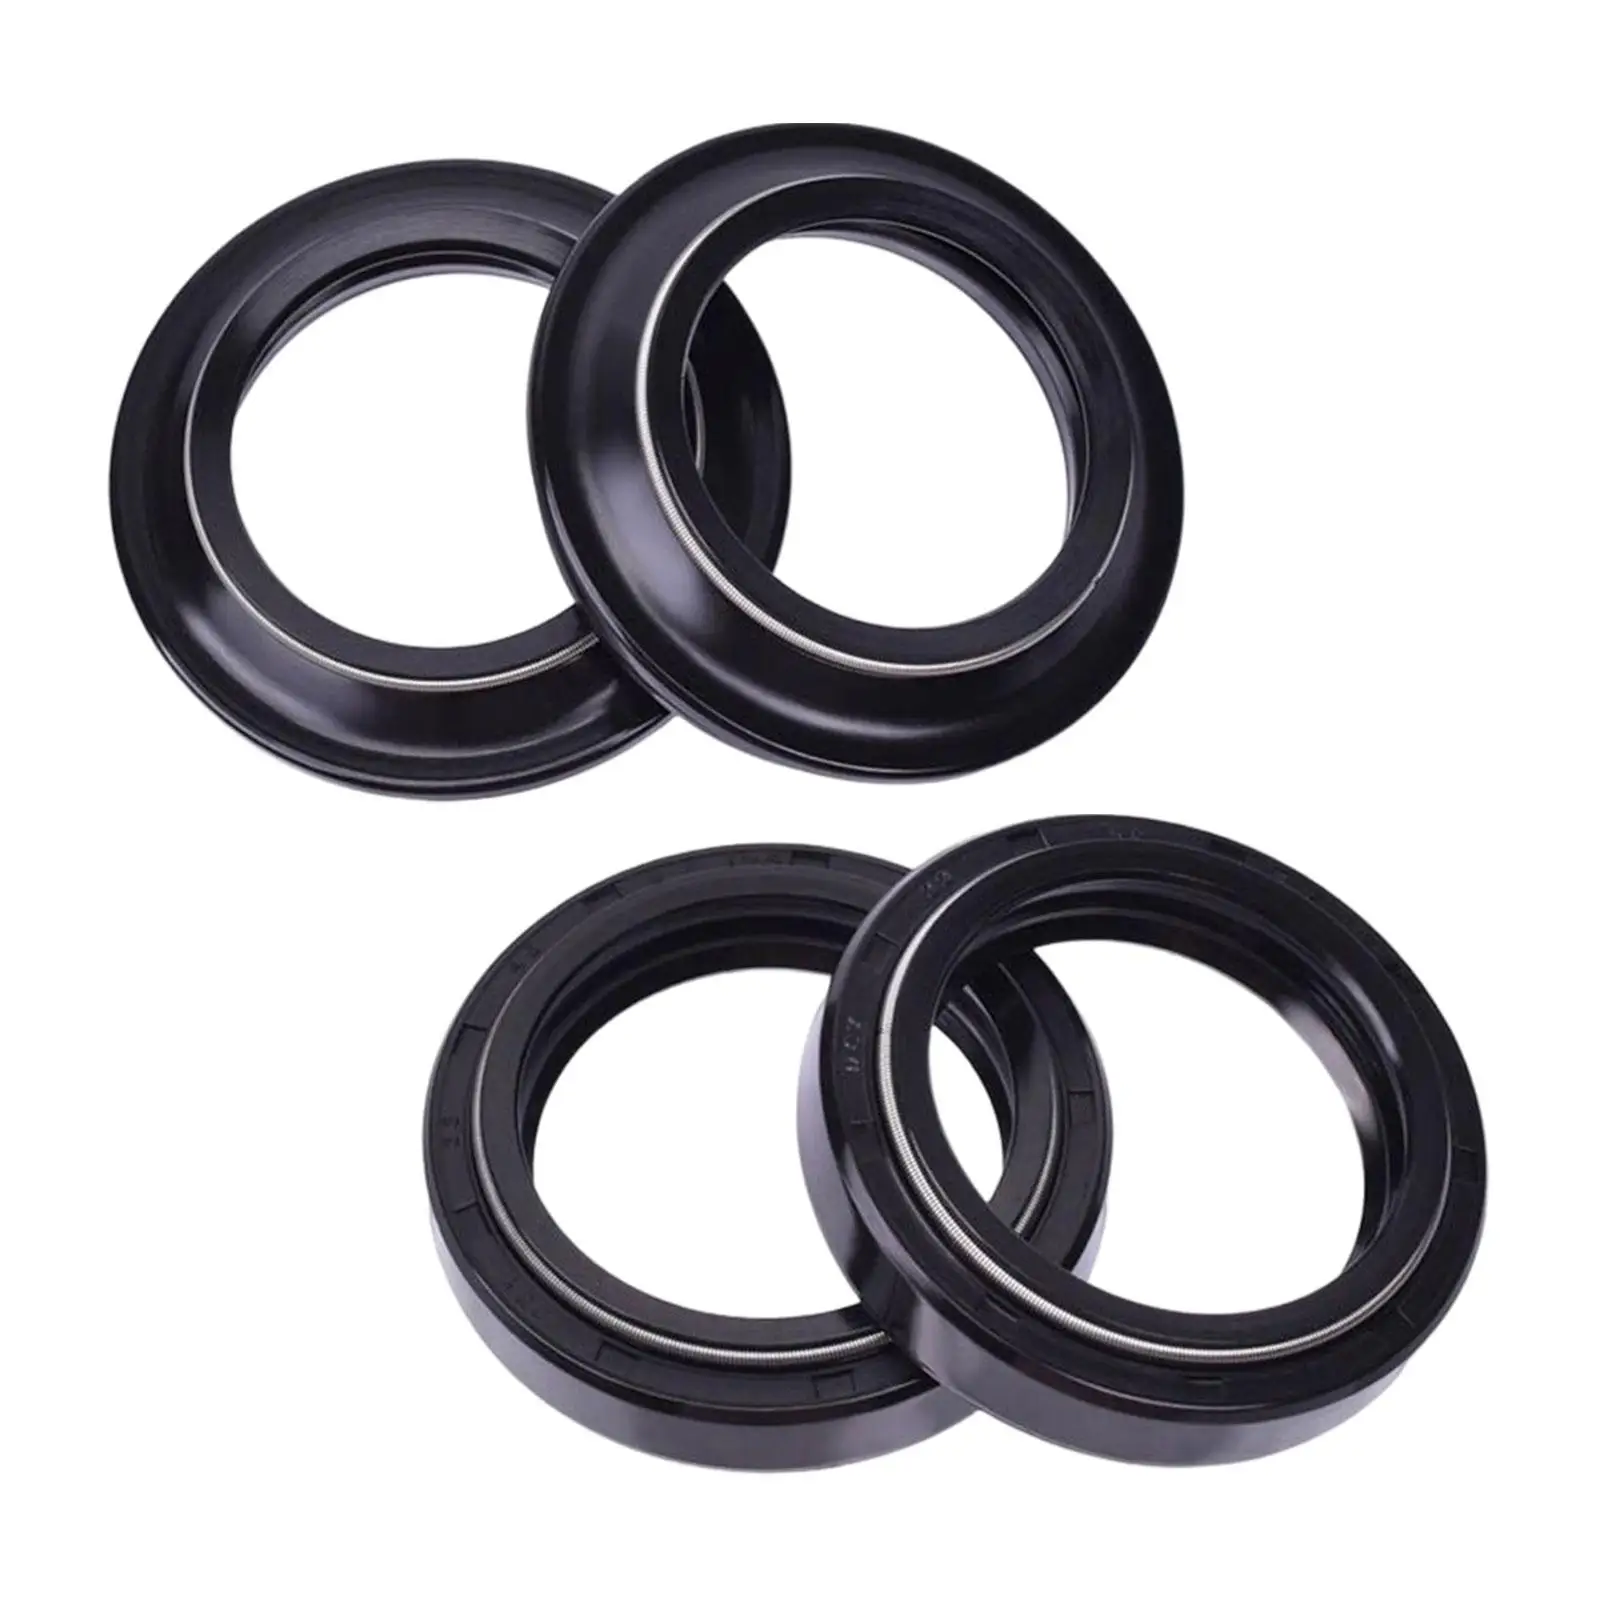 4 Pieces Motorcycle Front Fork Damper Shock Oil Seal & Dust Seal Parts for Yamaha TW200 XV125 Virago Yzf-r125 Yzf-r15 150cc